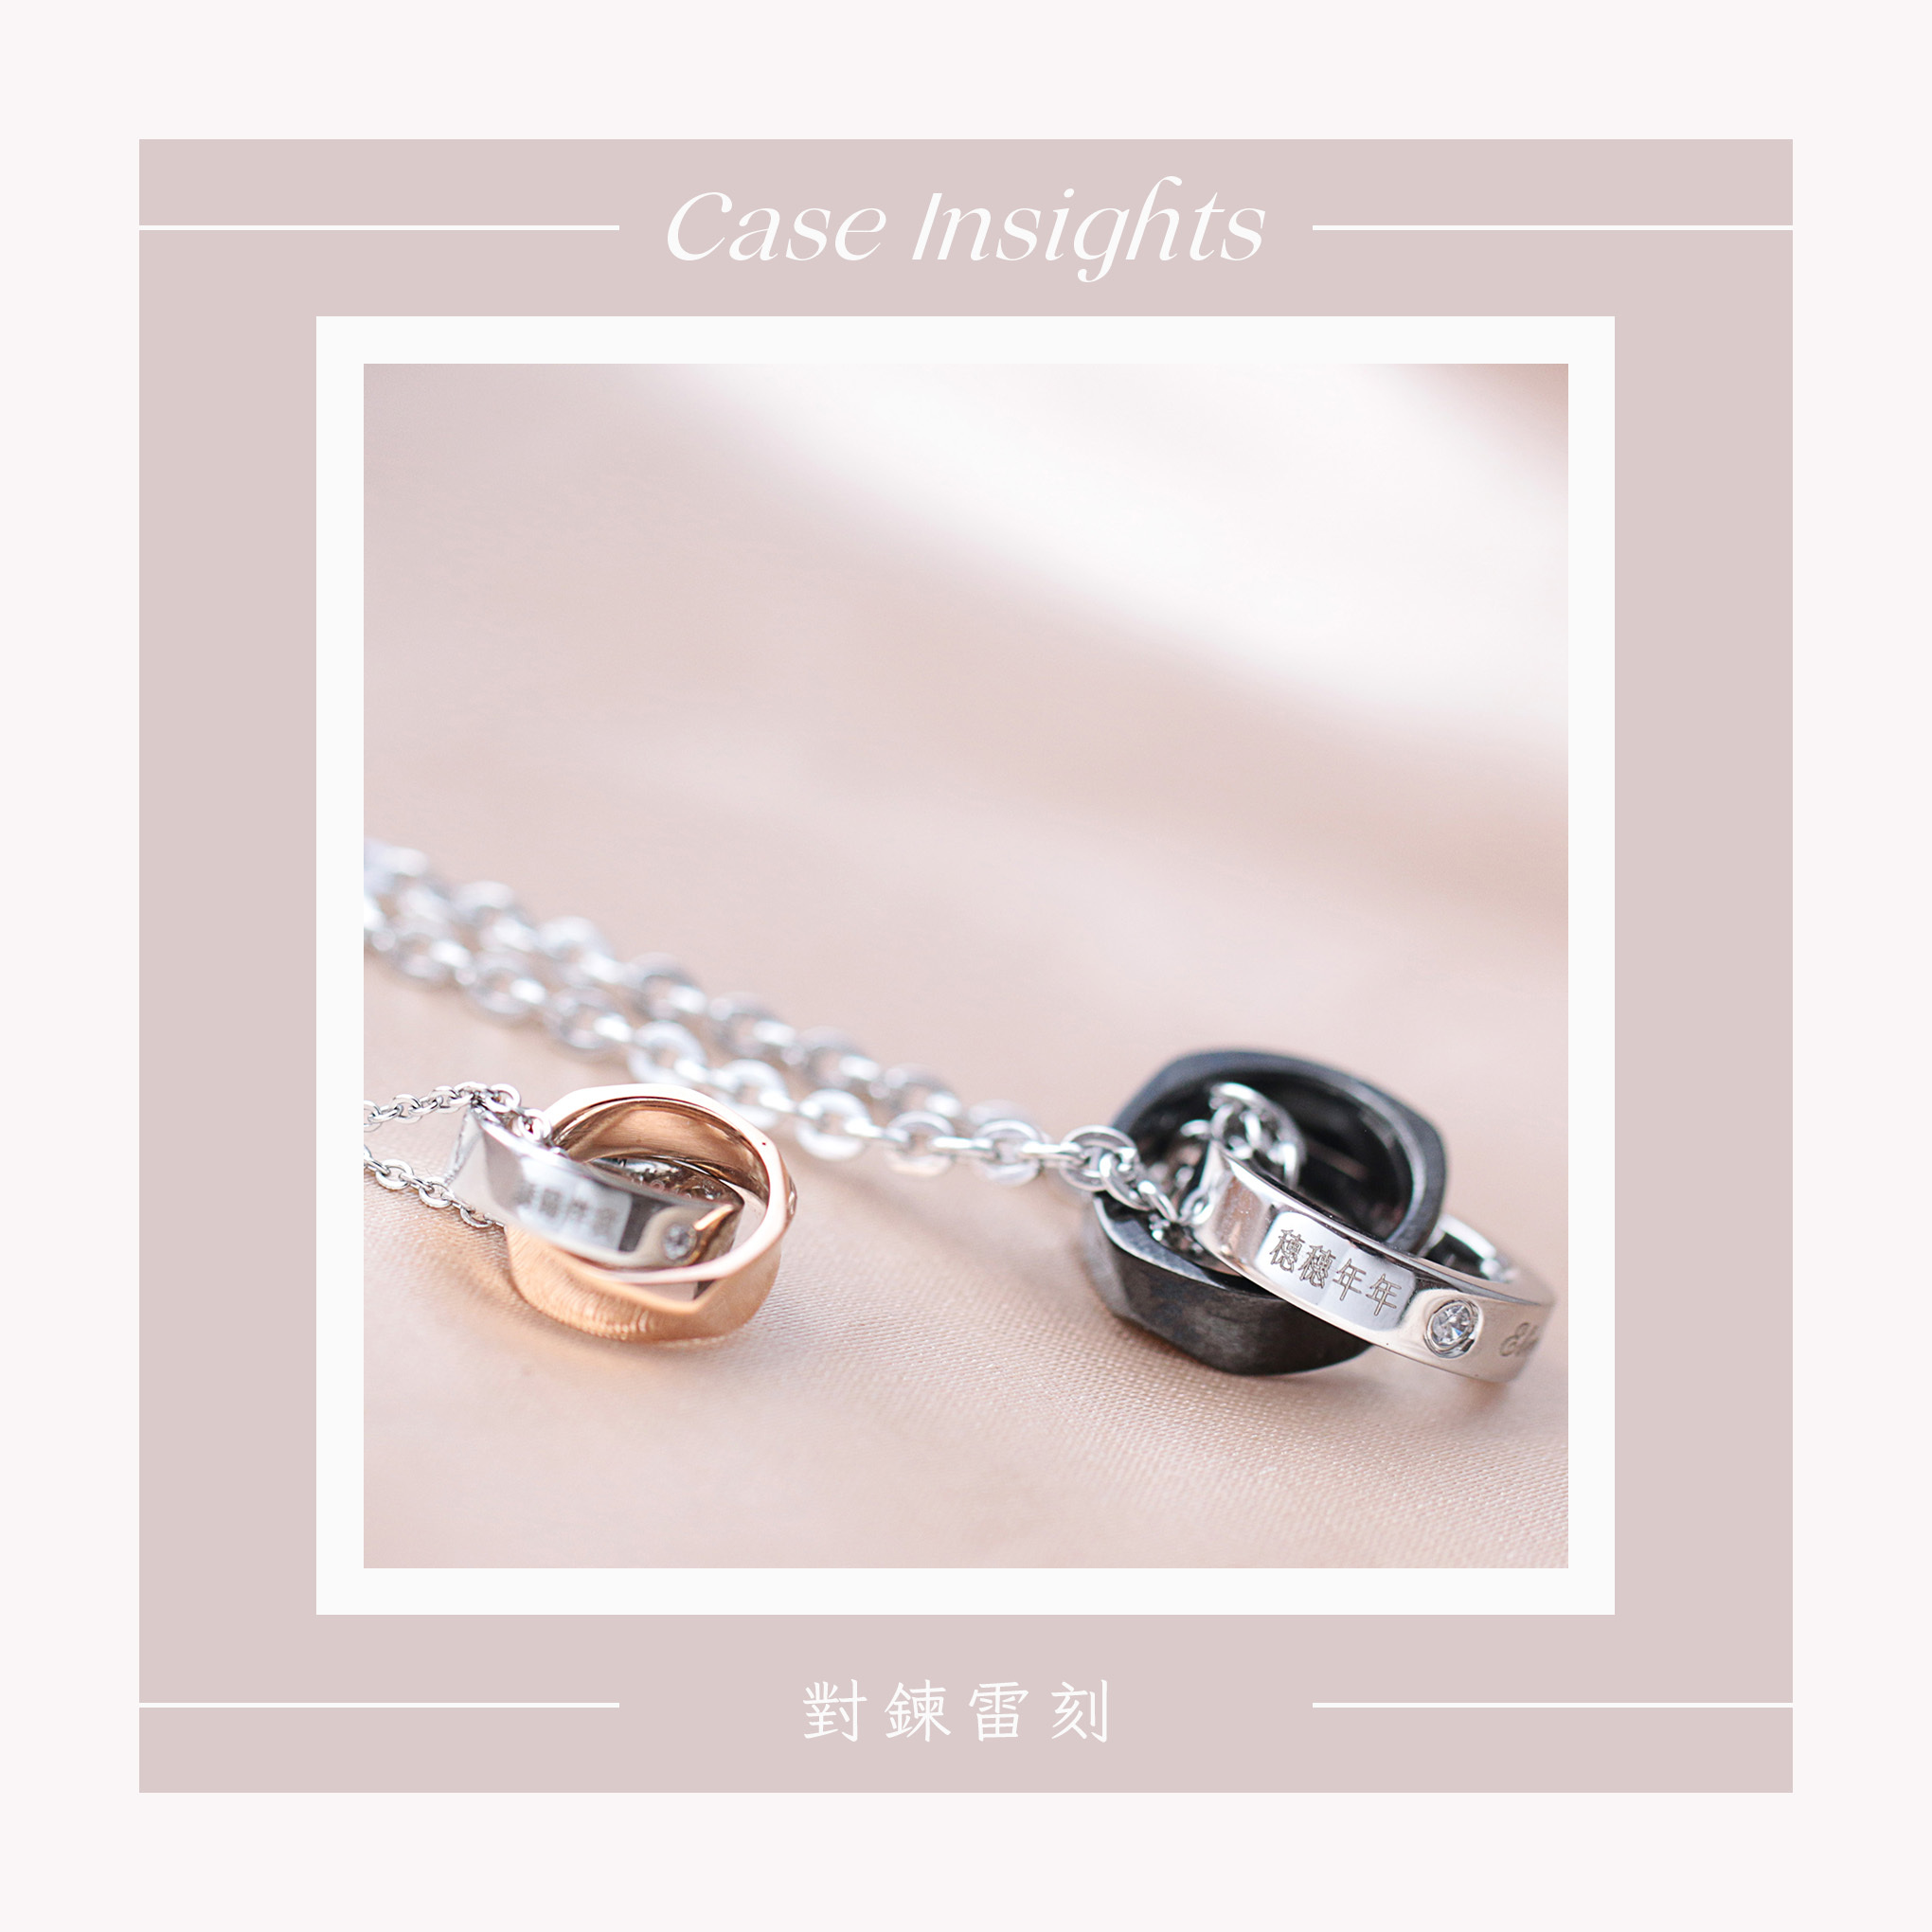 Case insights 07